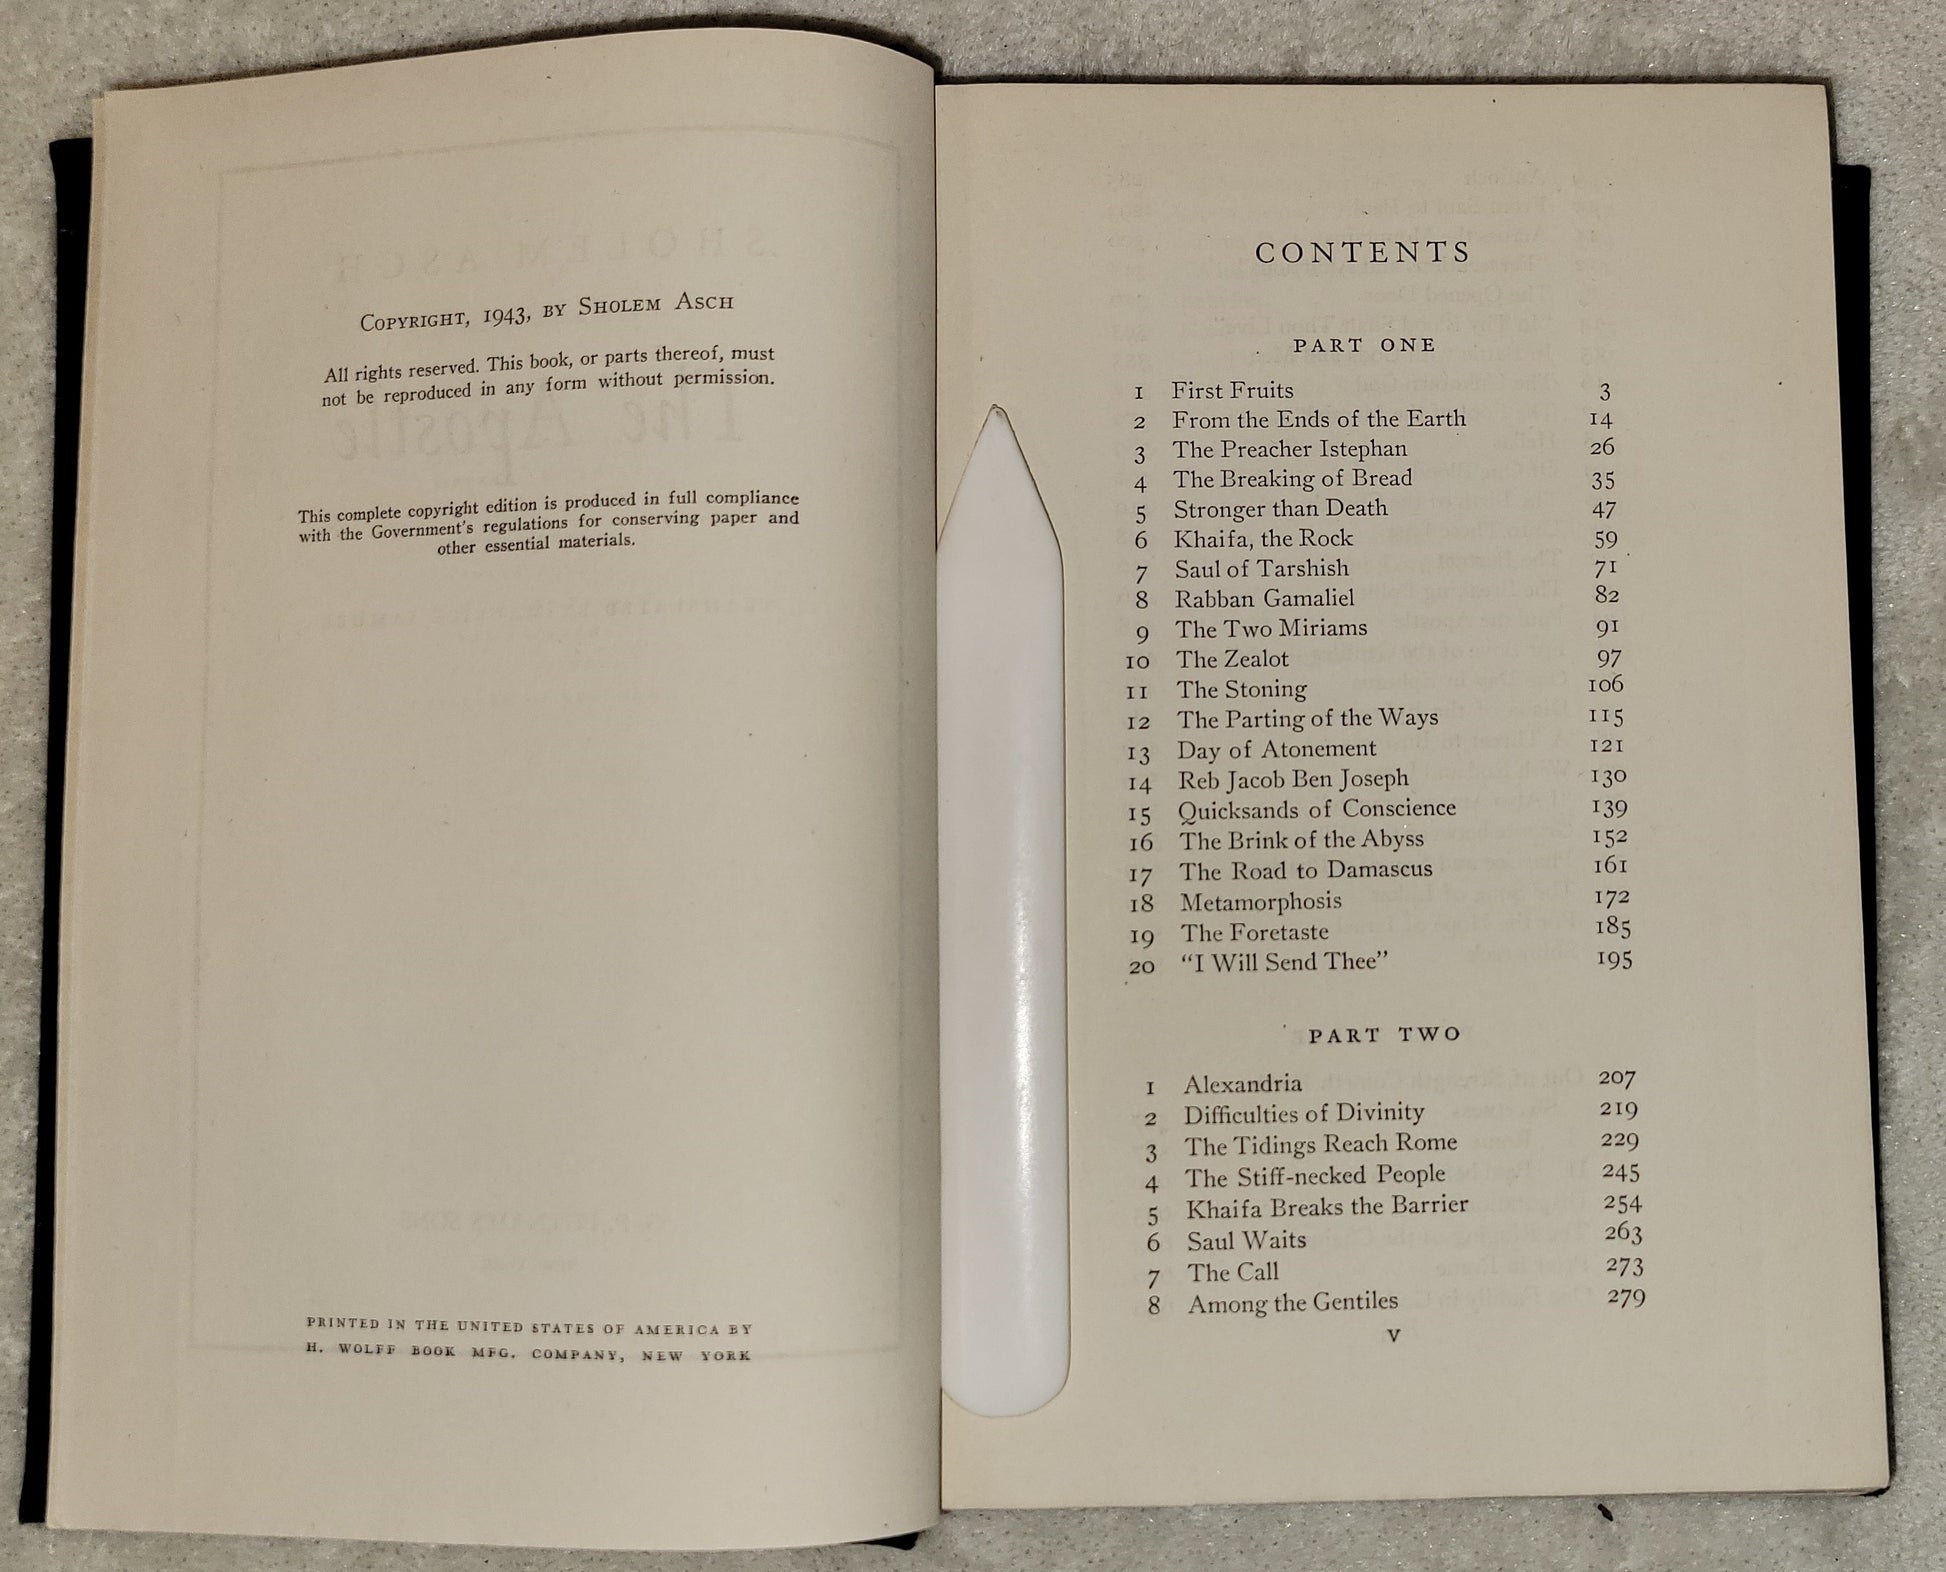 Vintage book for sale “The Apostle” by Sholem Asch published by H. Wolff Book Mfg. Company, 1943. Table of contents.